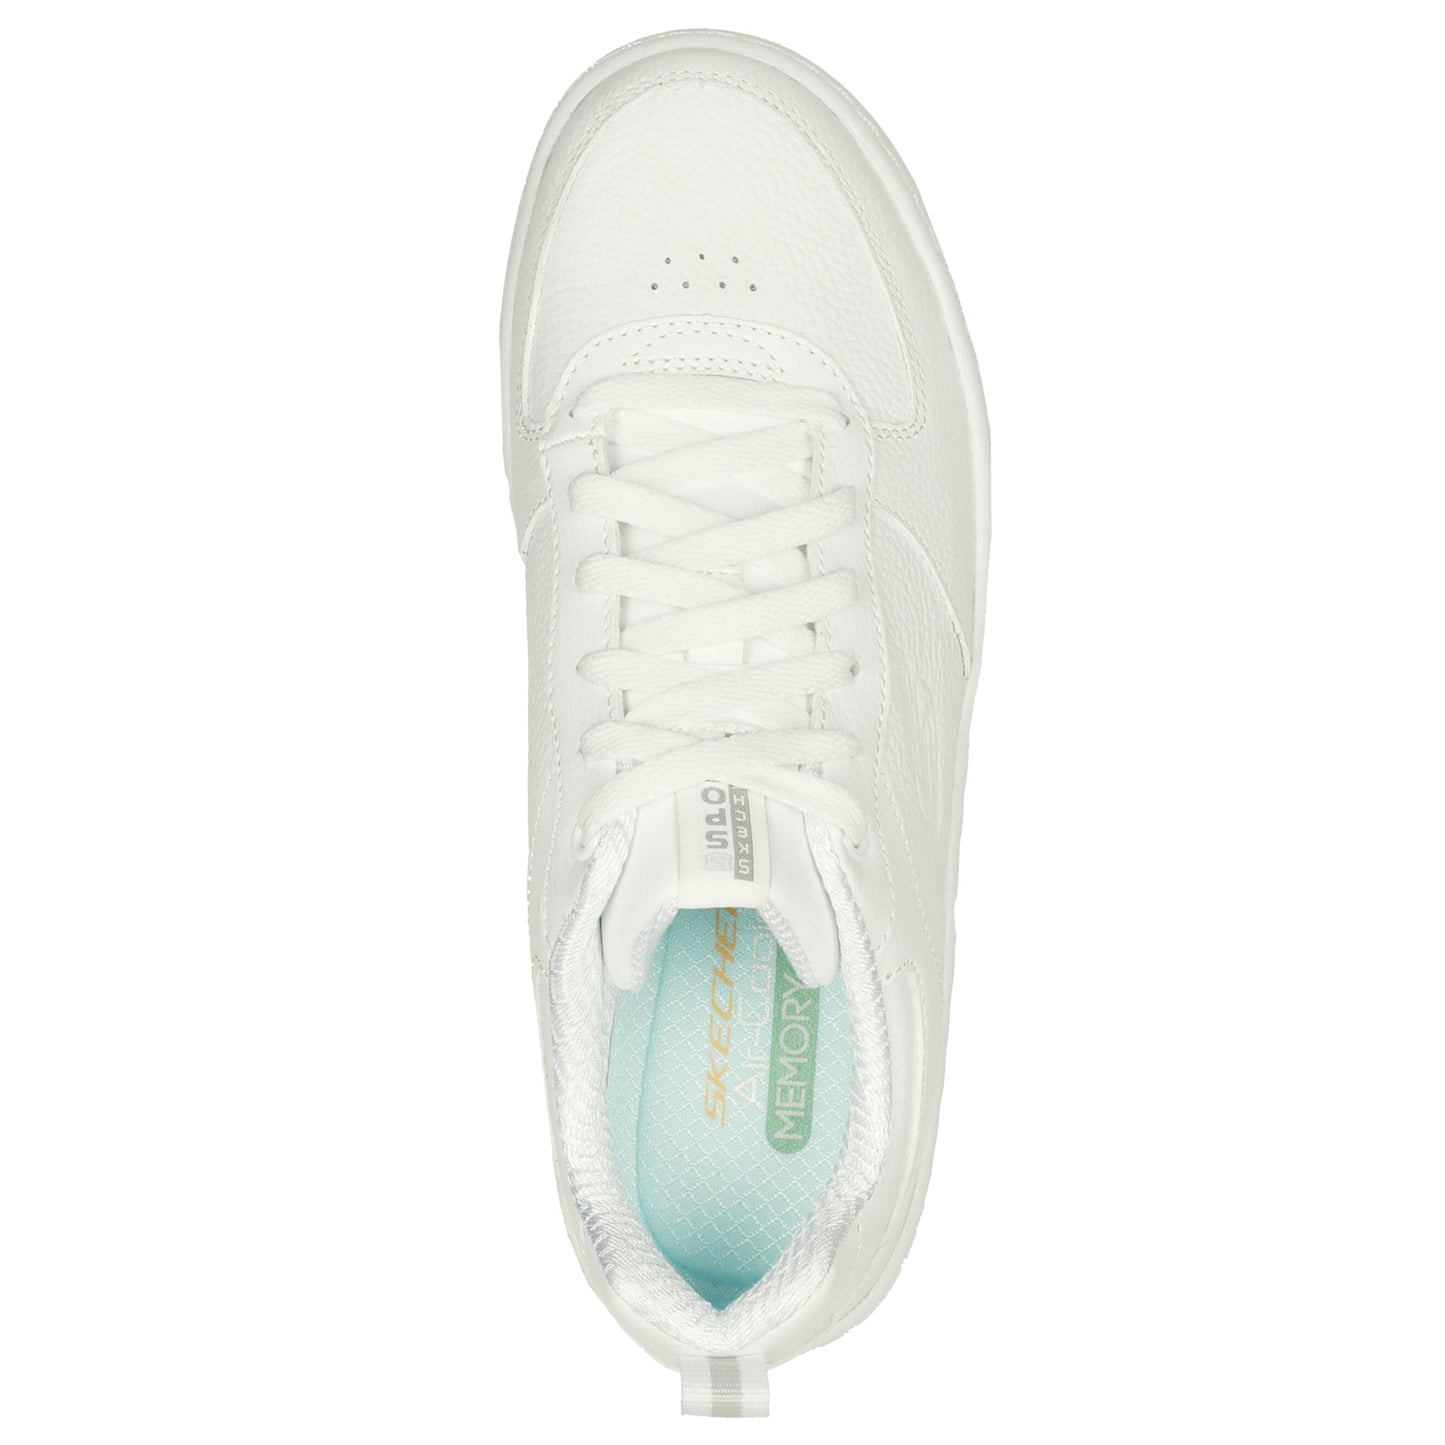 Skechers Womens Sport Court 92 Illustrious White Leather Classic Lace Up Trainer Shoes